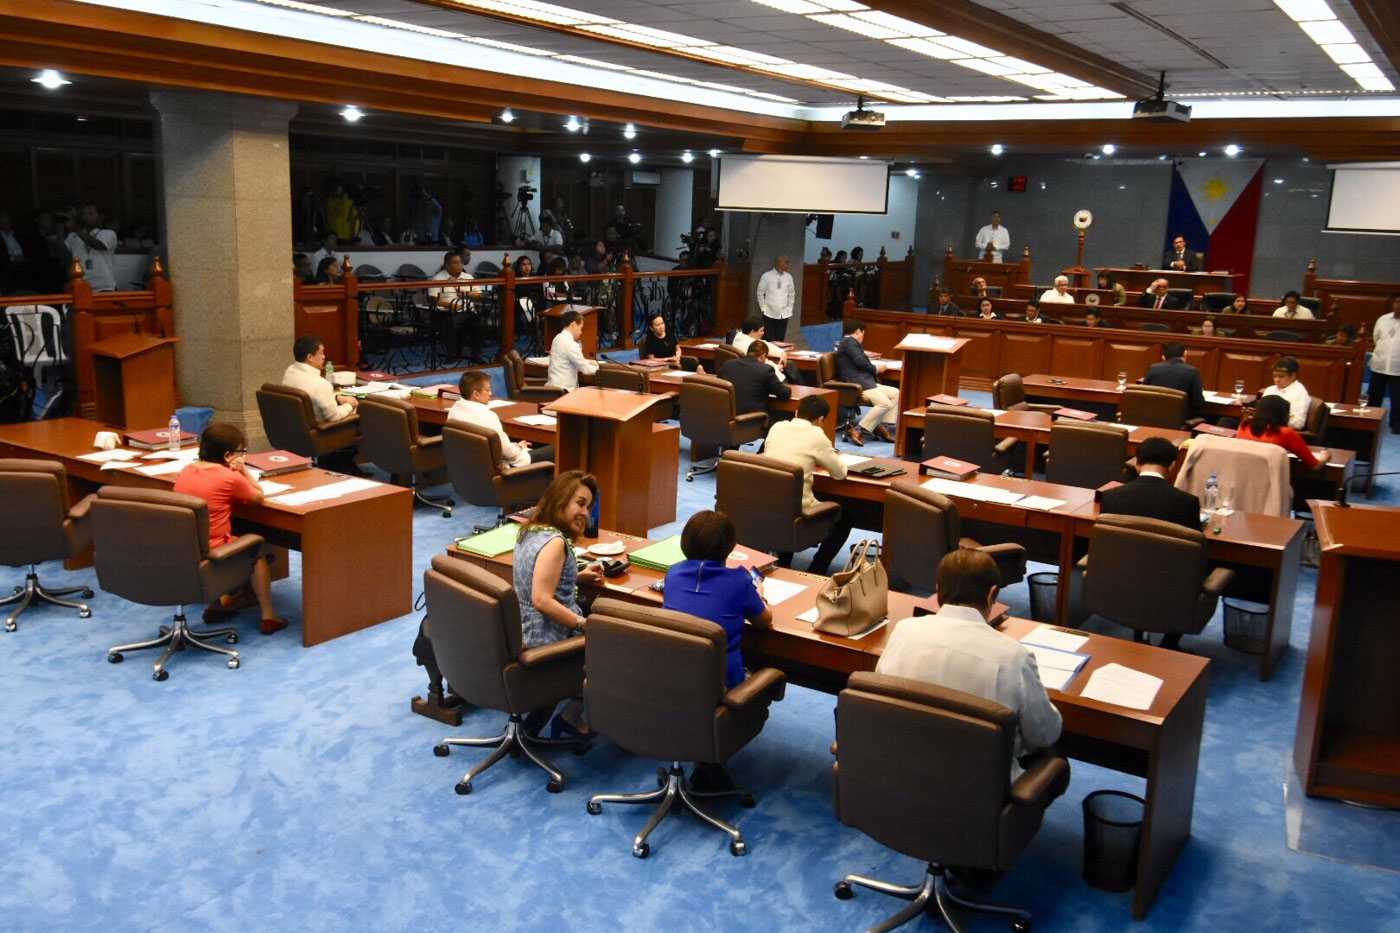 Senate committee crafts rules for review of gov’t agencies' confidential funds